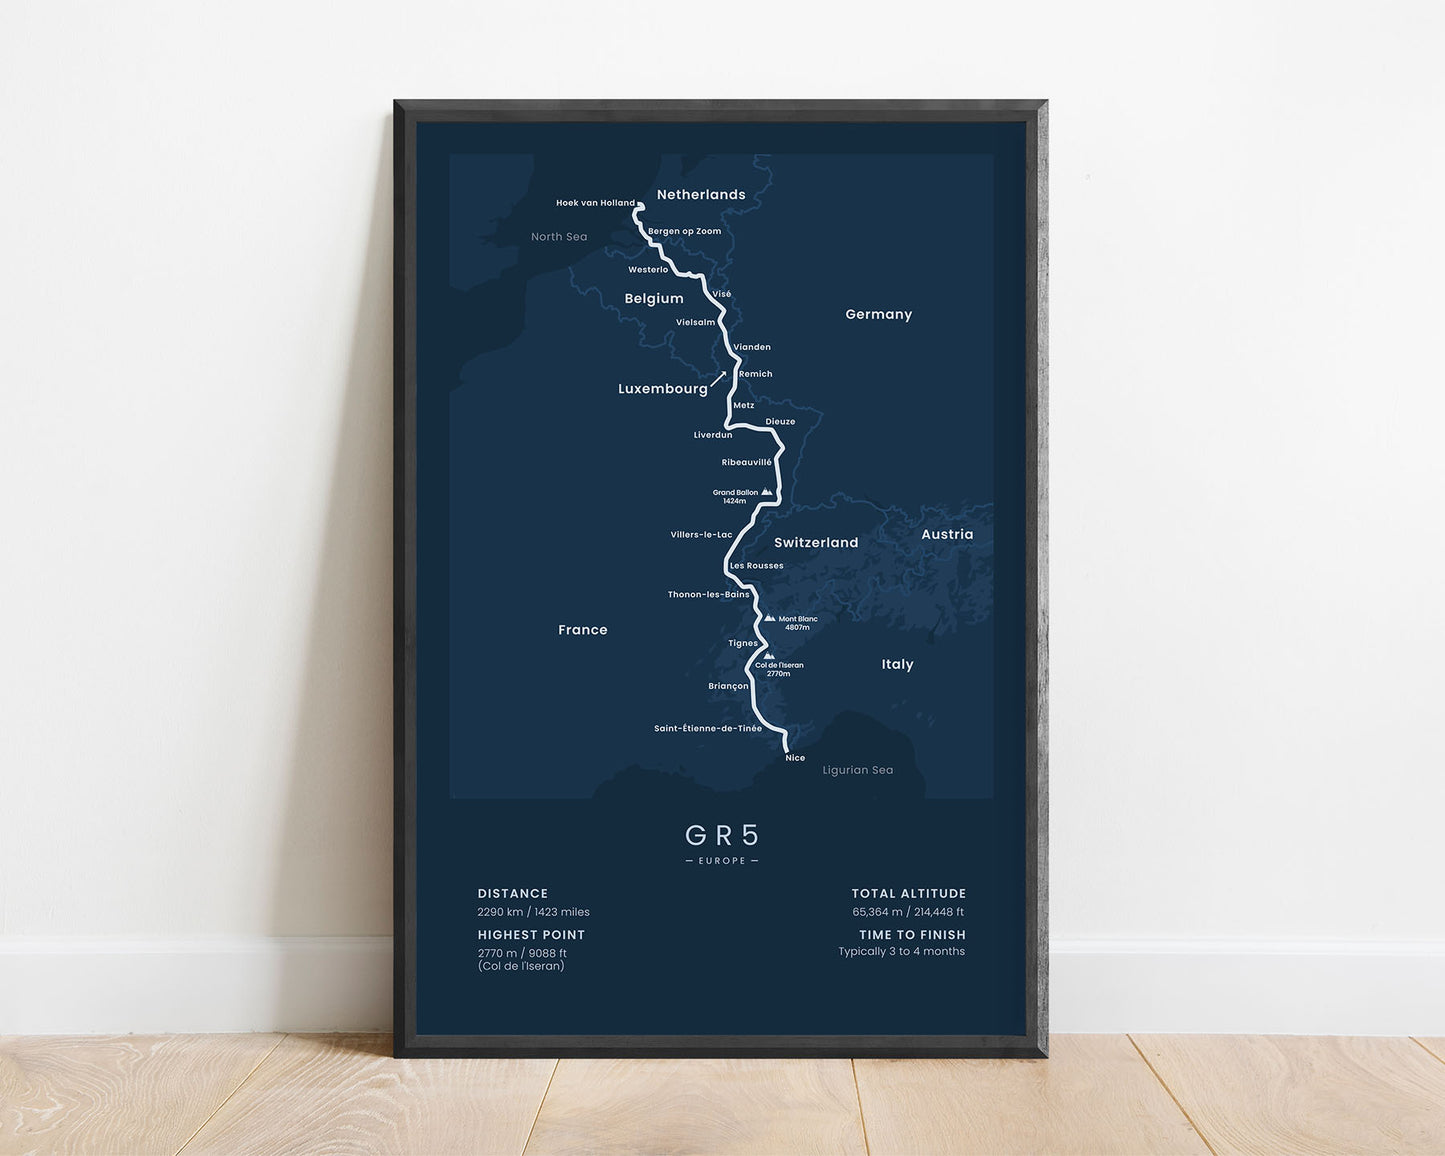 GR5 (Hoek van Holland to Nice) Trail Poster with Blue Background